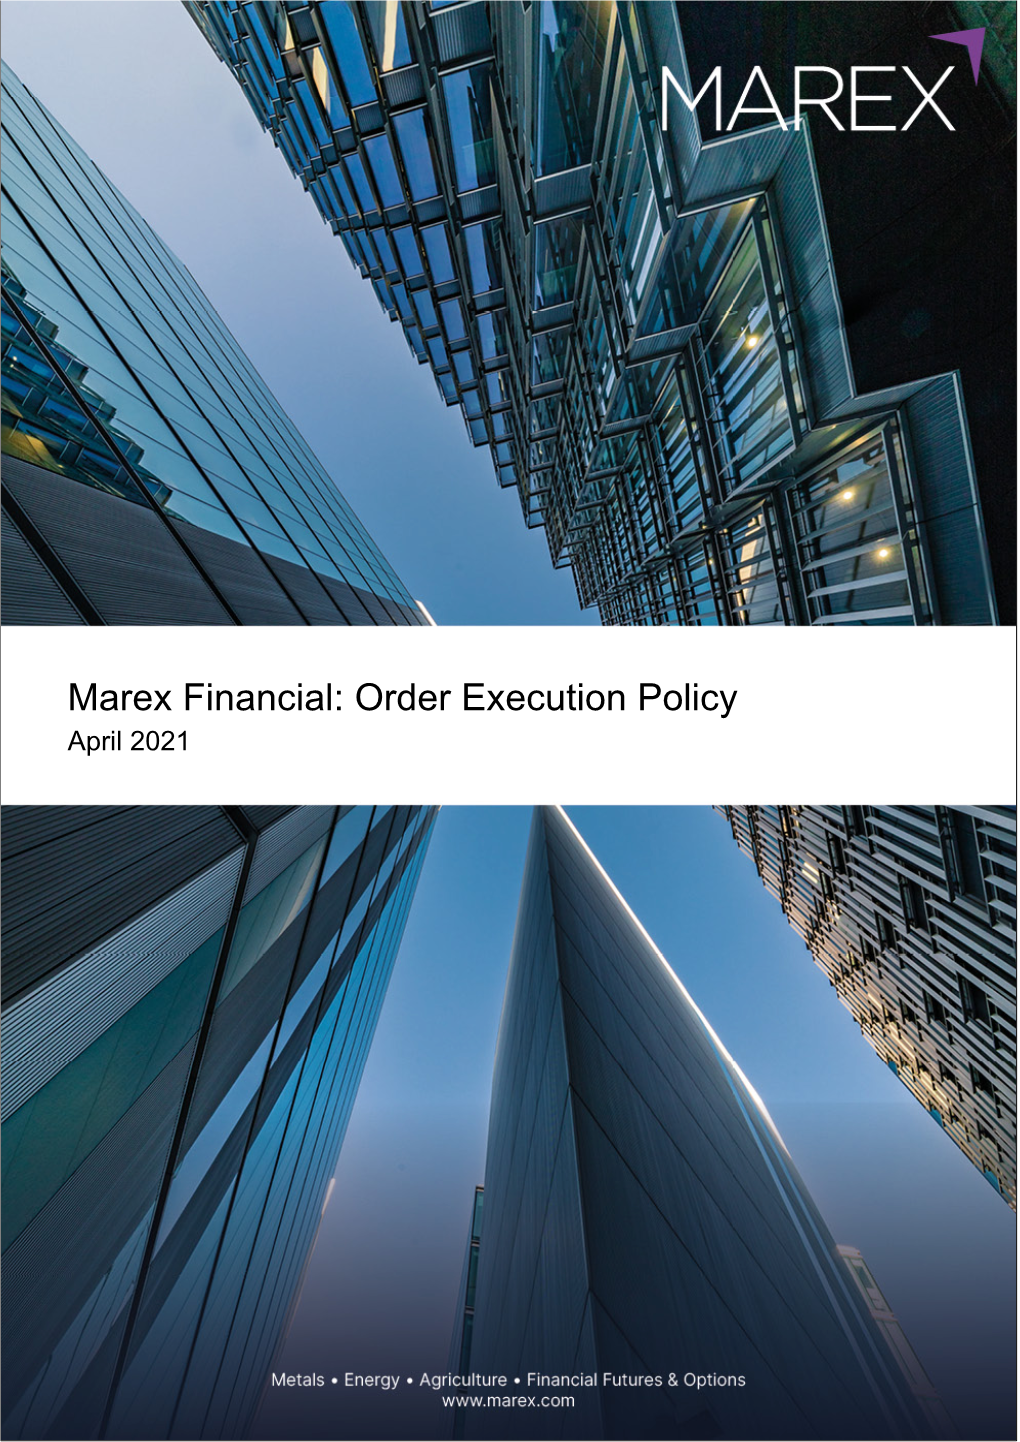 Marex Financial: Order Execution Policy